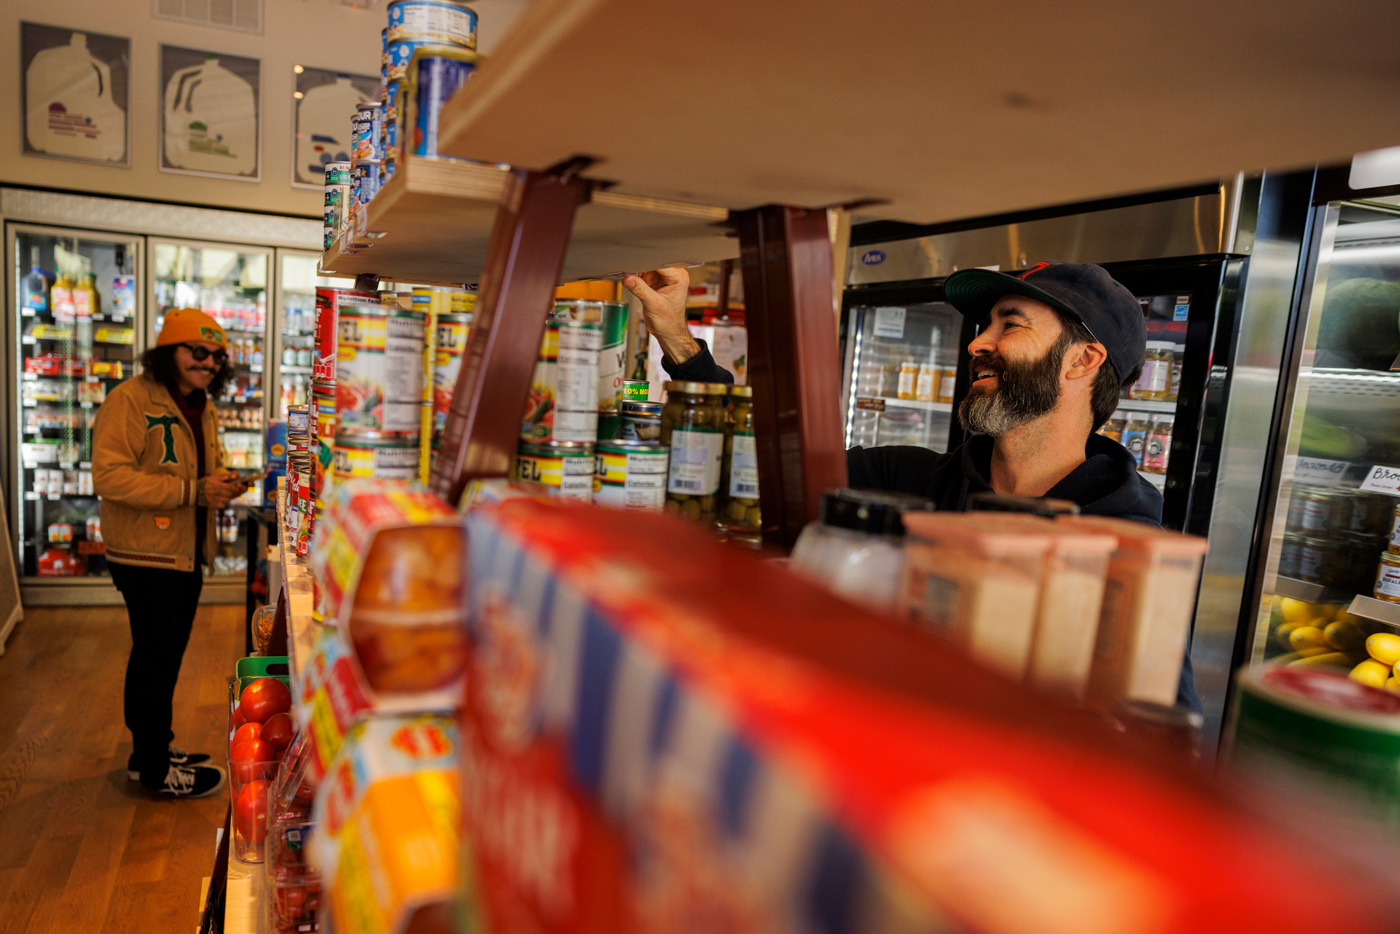 Sam Newman, right, a grocer in the East End, places products on the shelves of his Houston store.